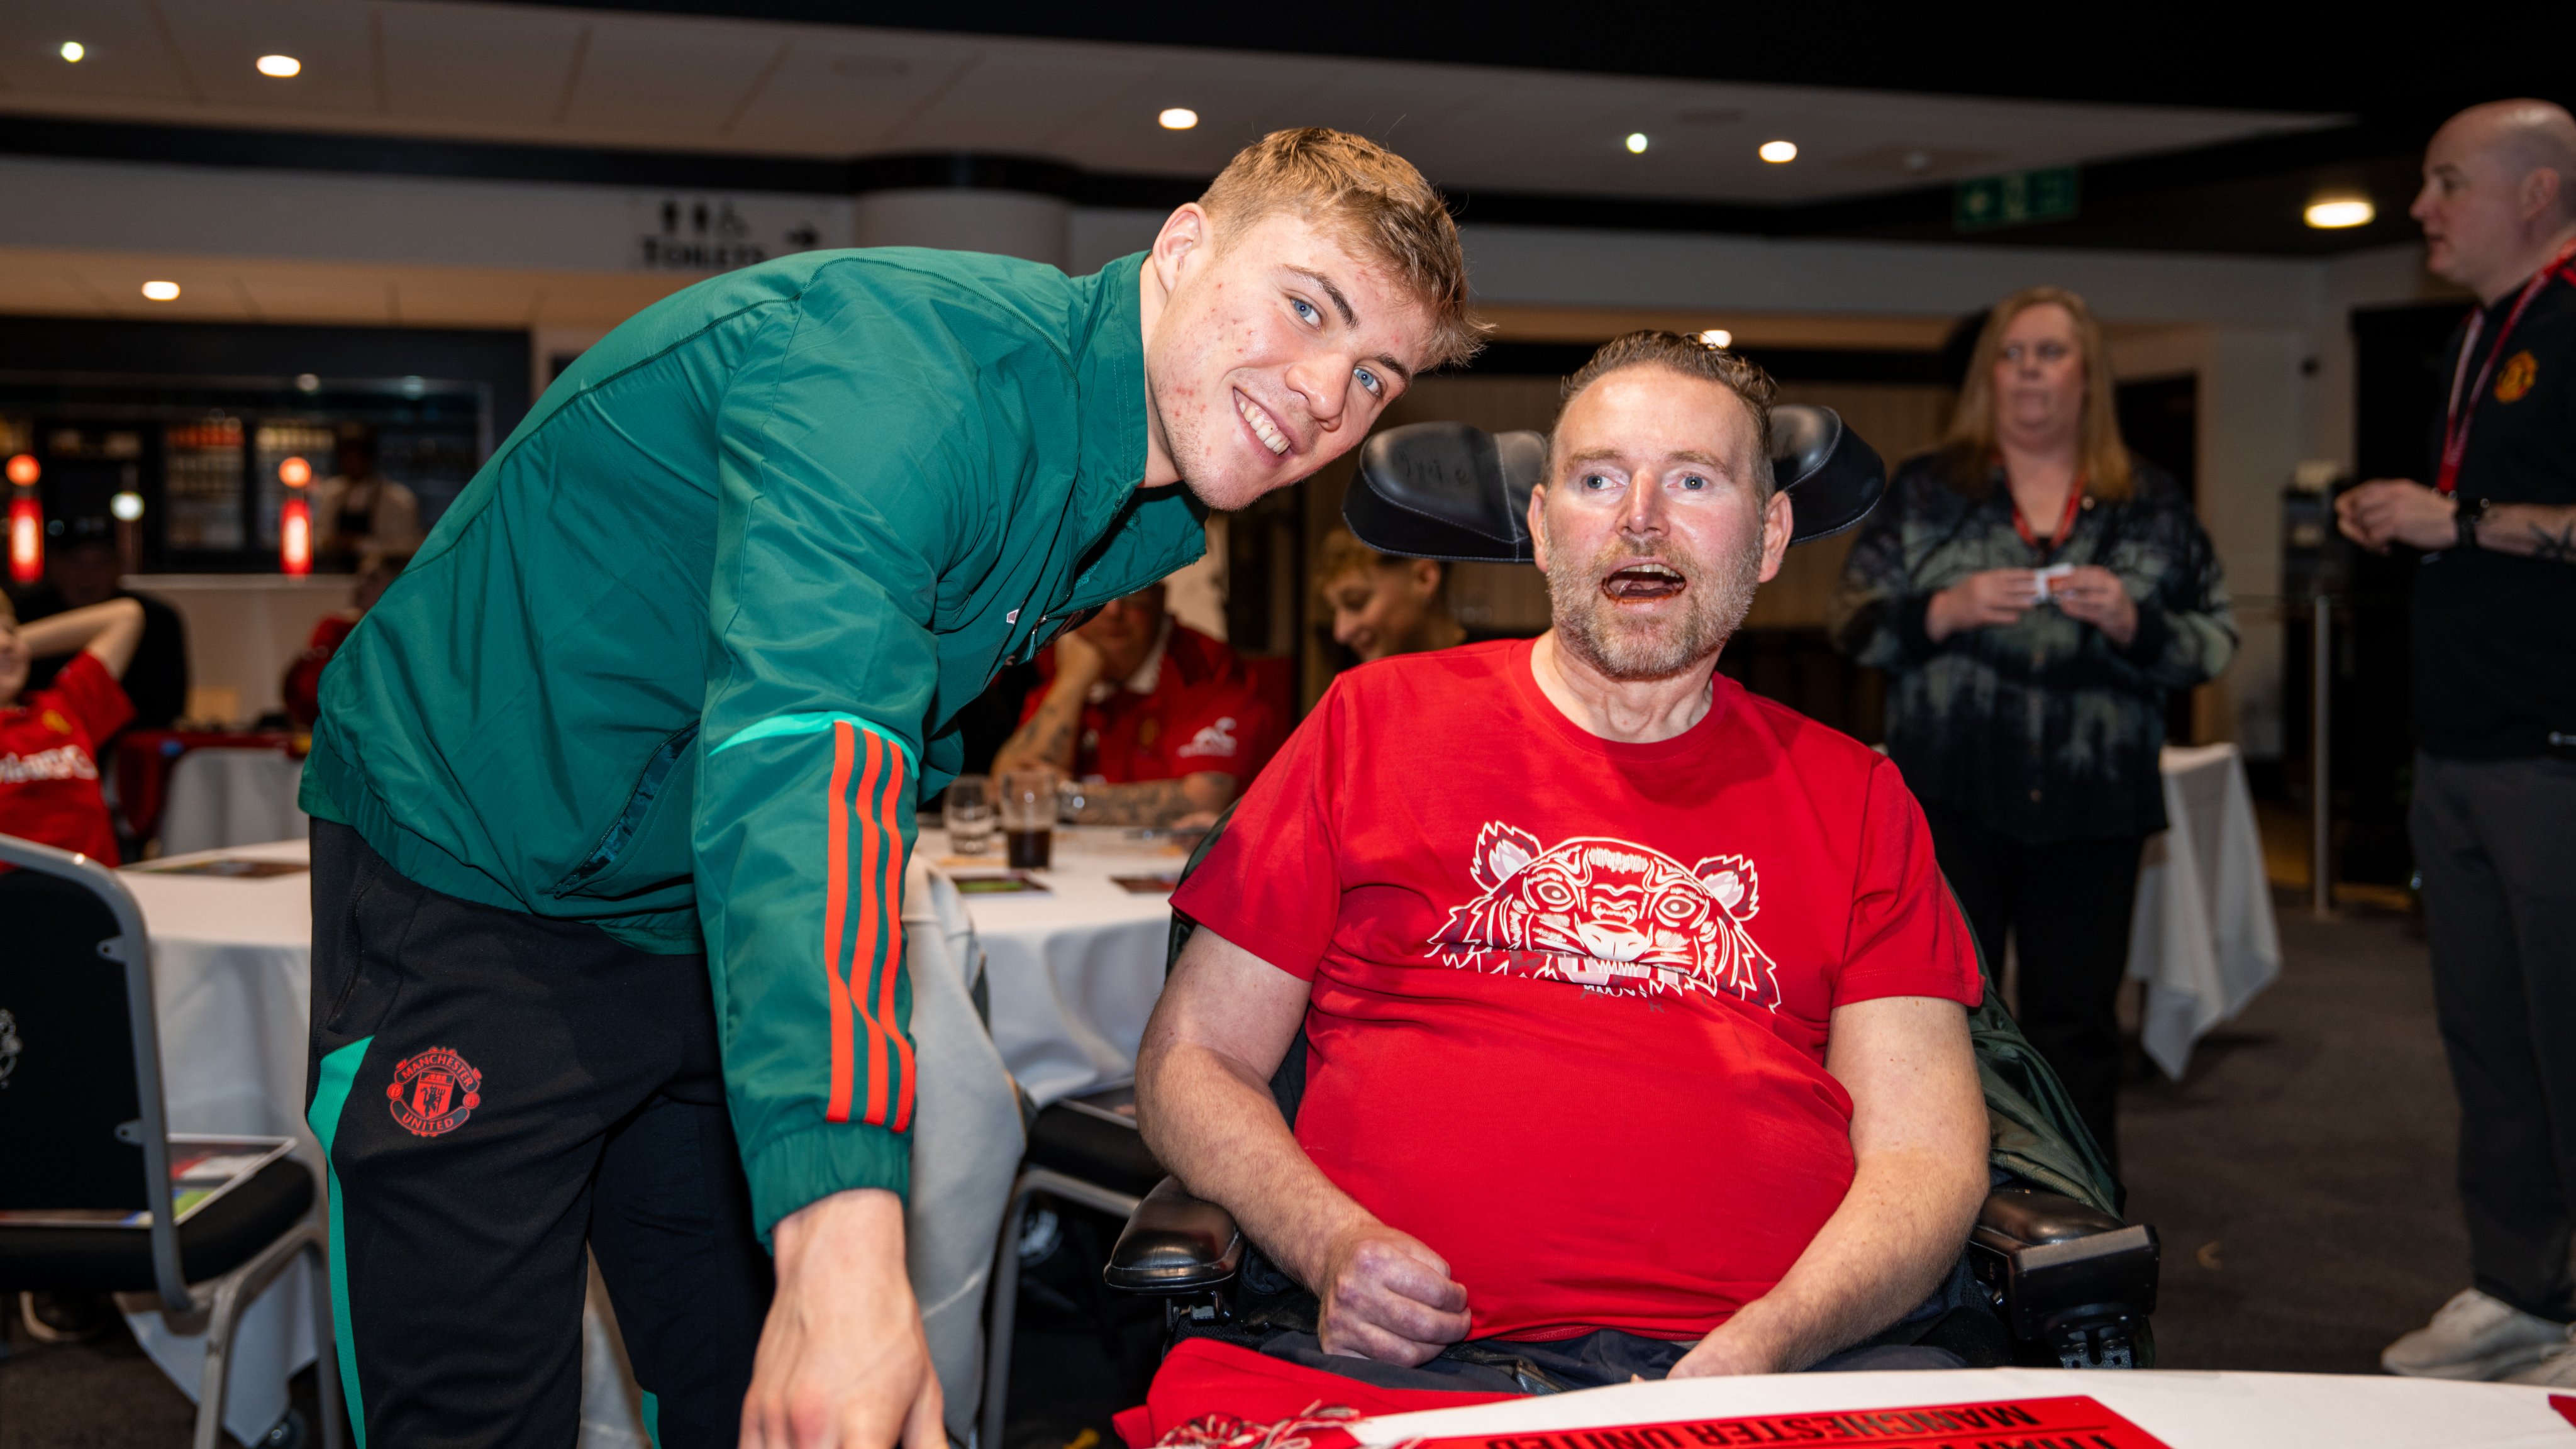 Rasmus Hojlund poses with a fan at the MUDSA Christmas party.